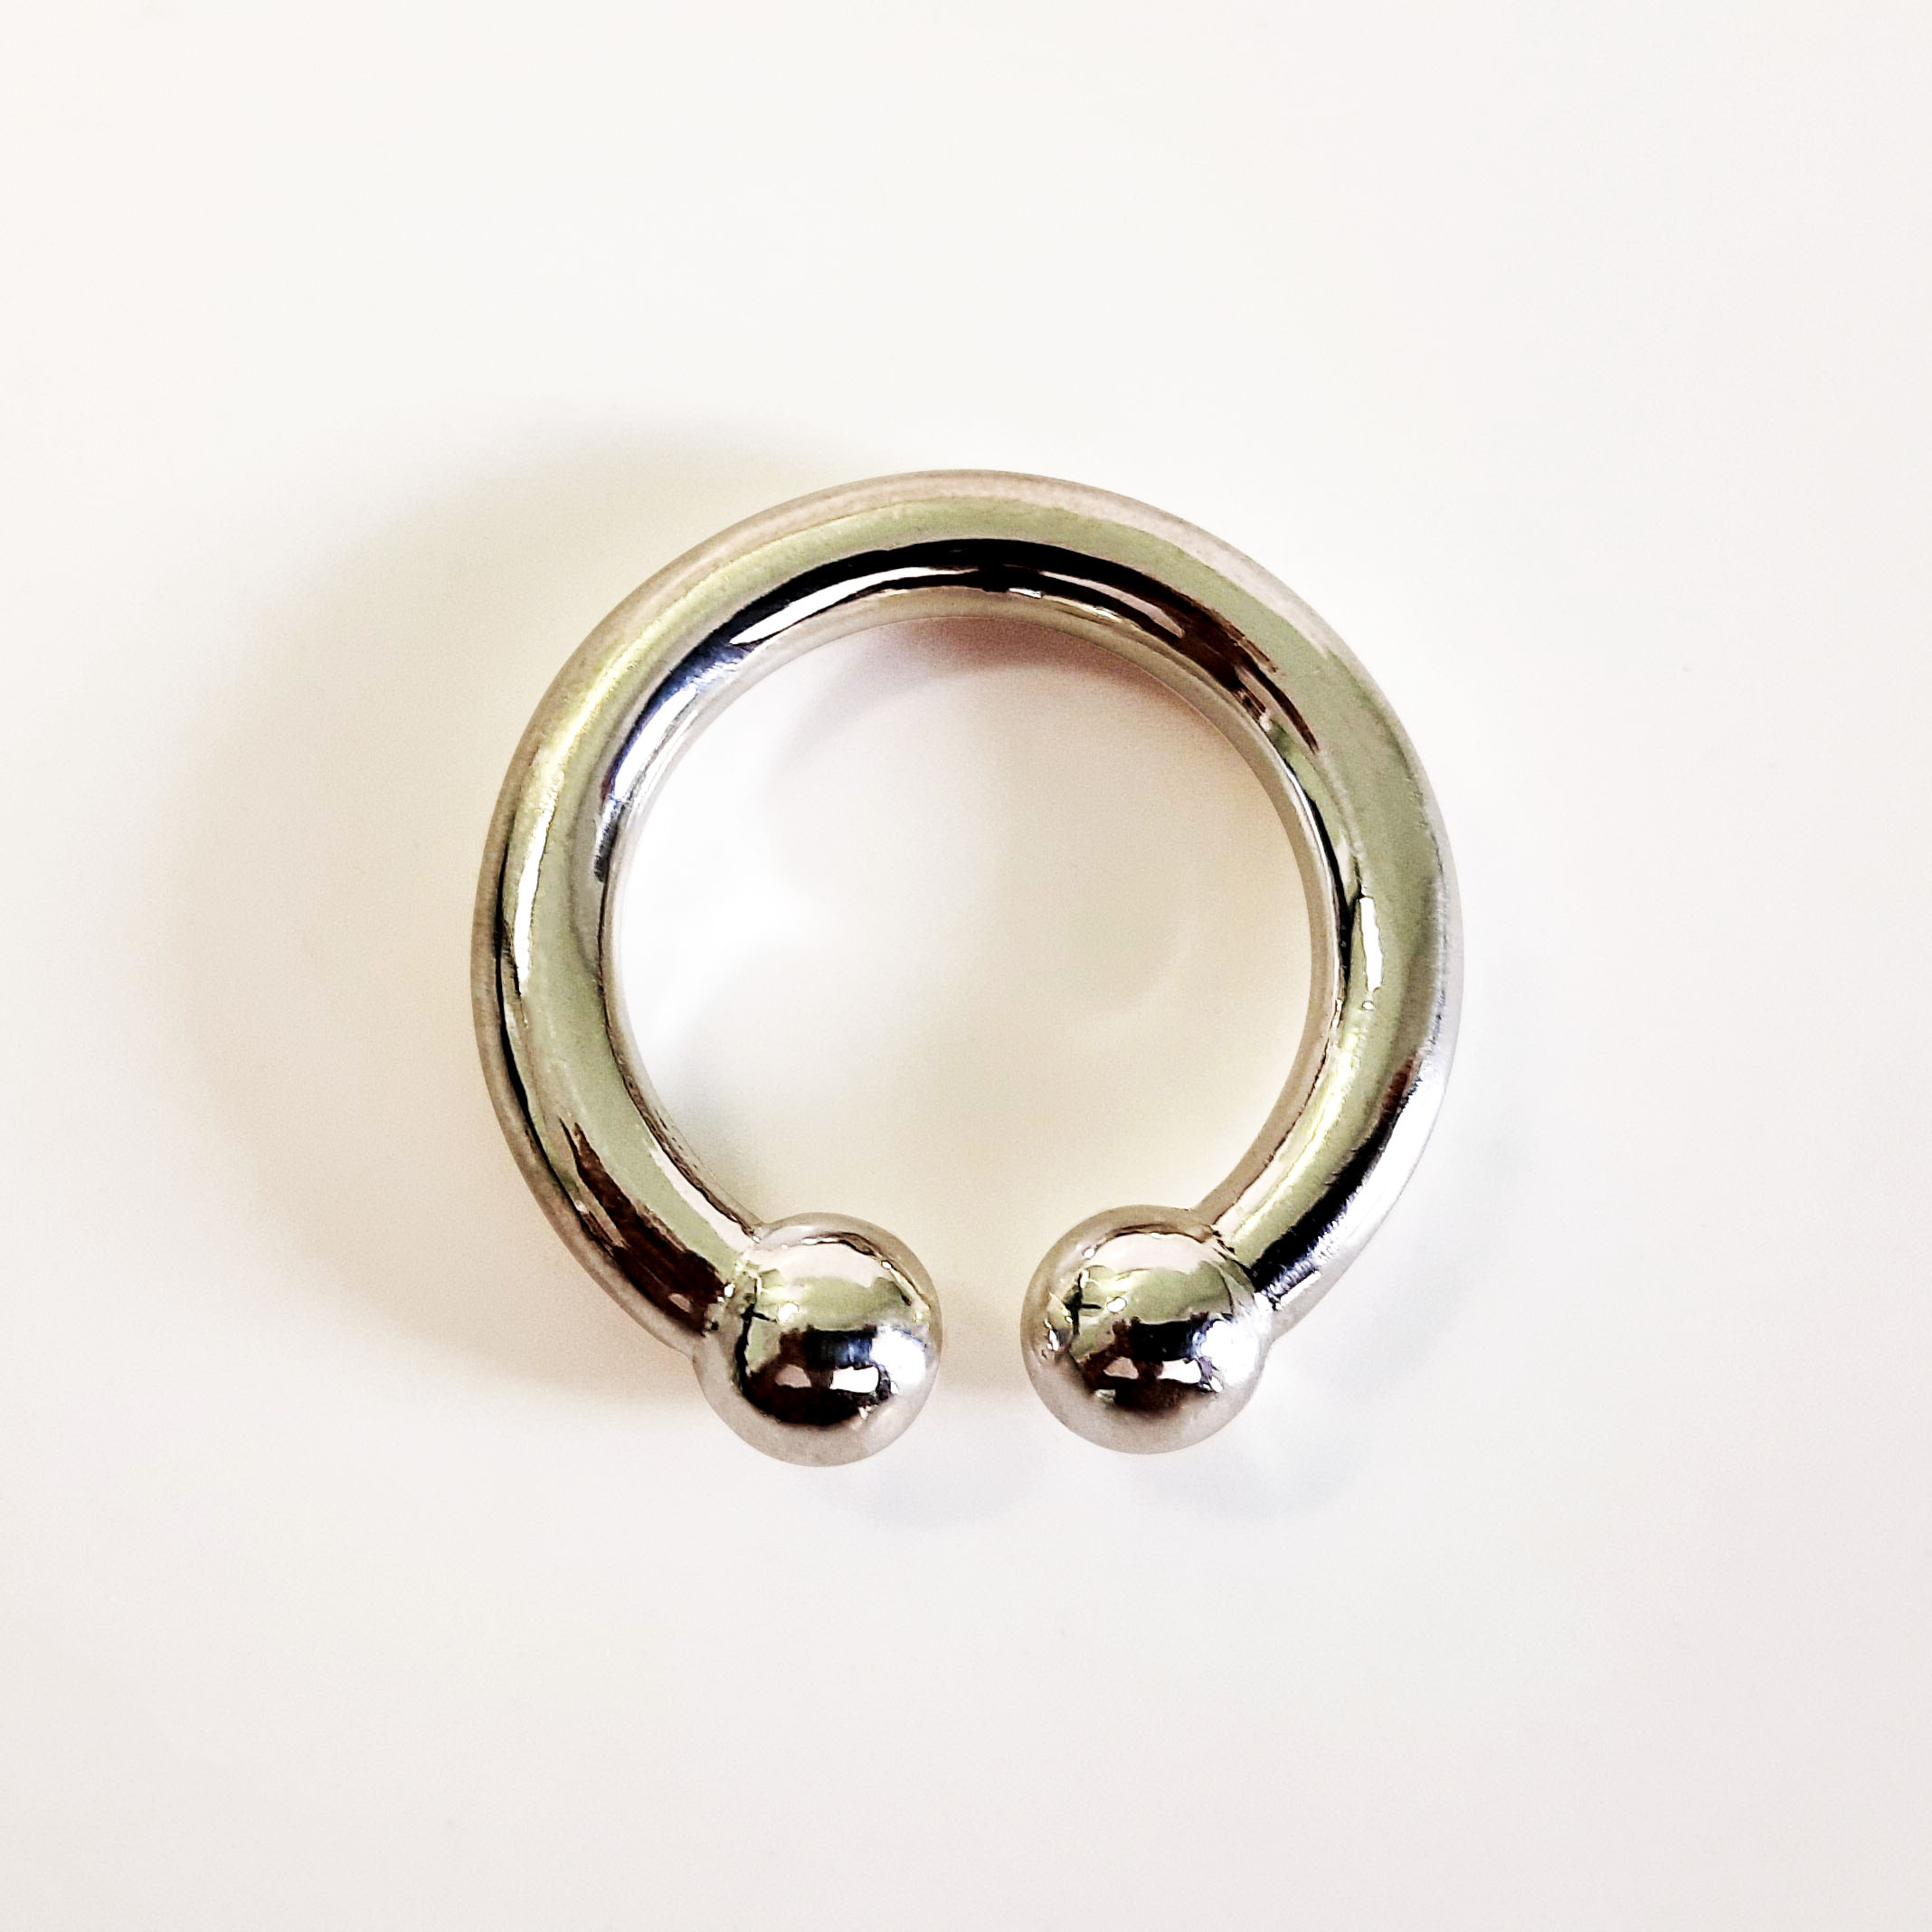 Silver Handmade Glans Ring “Spiral” - Athumani Jewellery and Toys